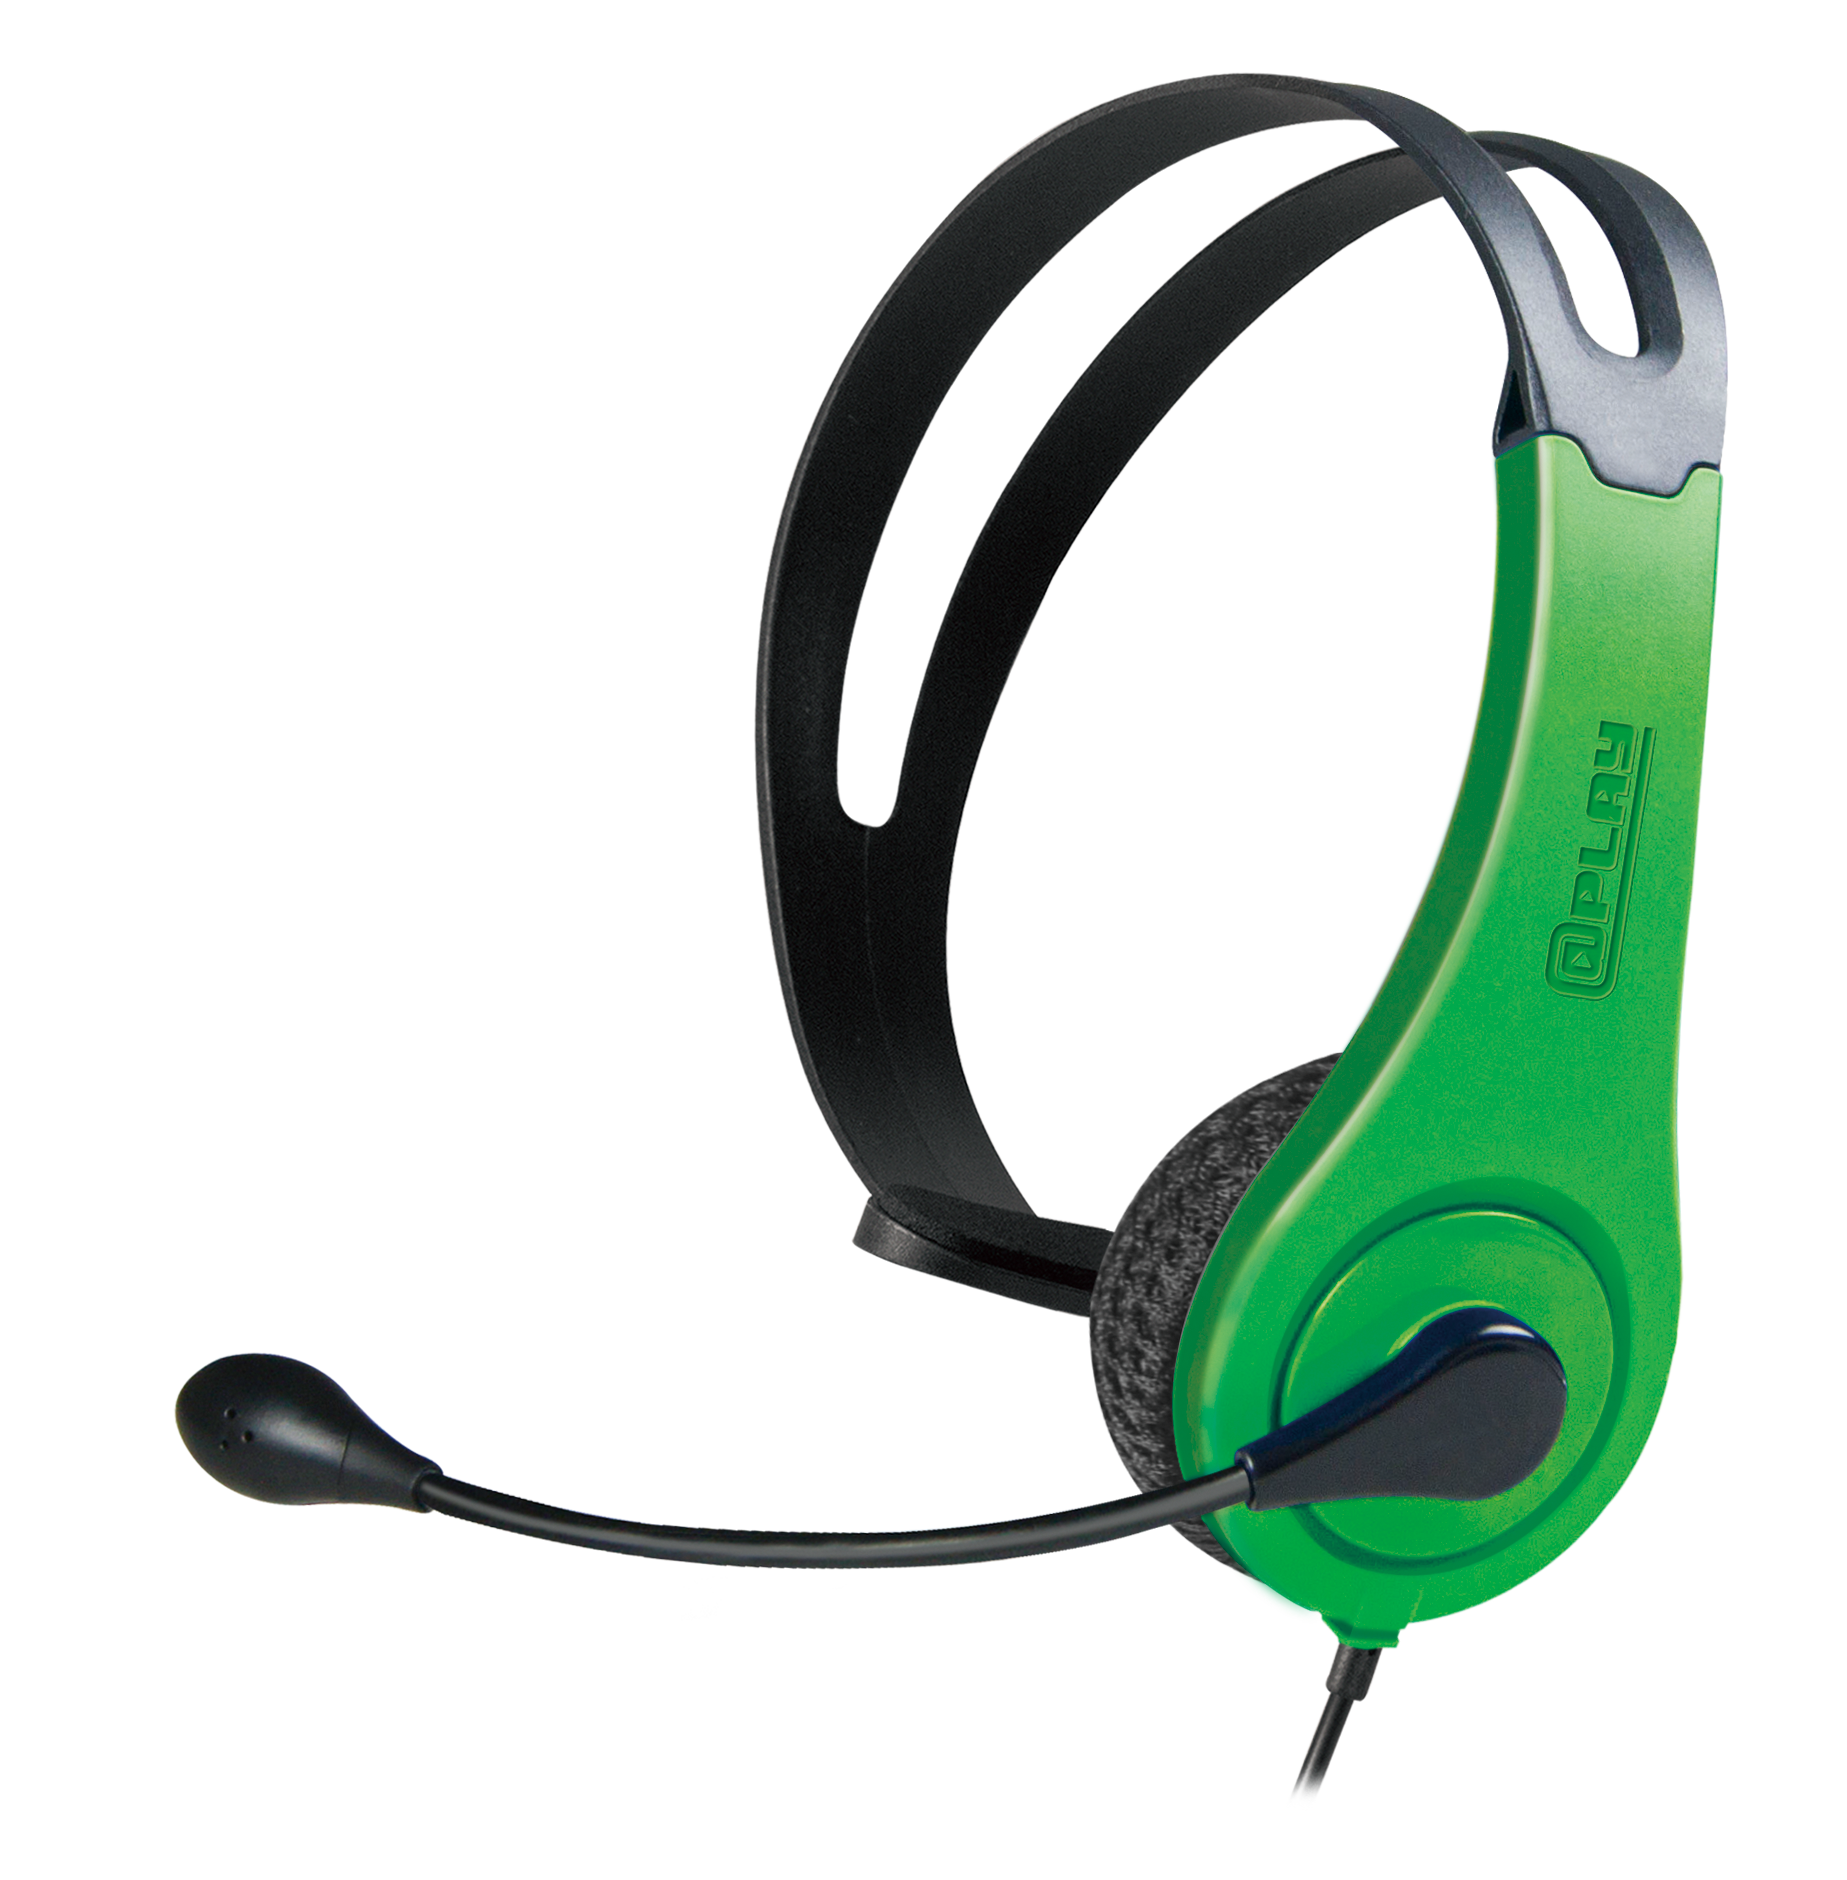 Communicator Headset for Xbox One